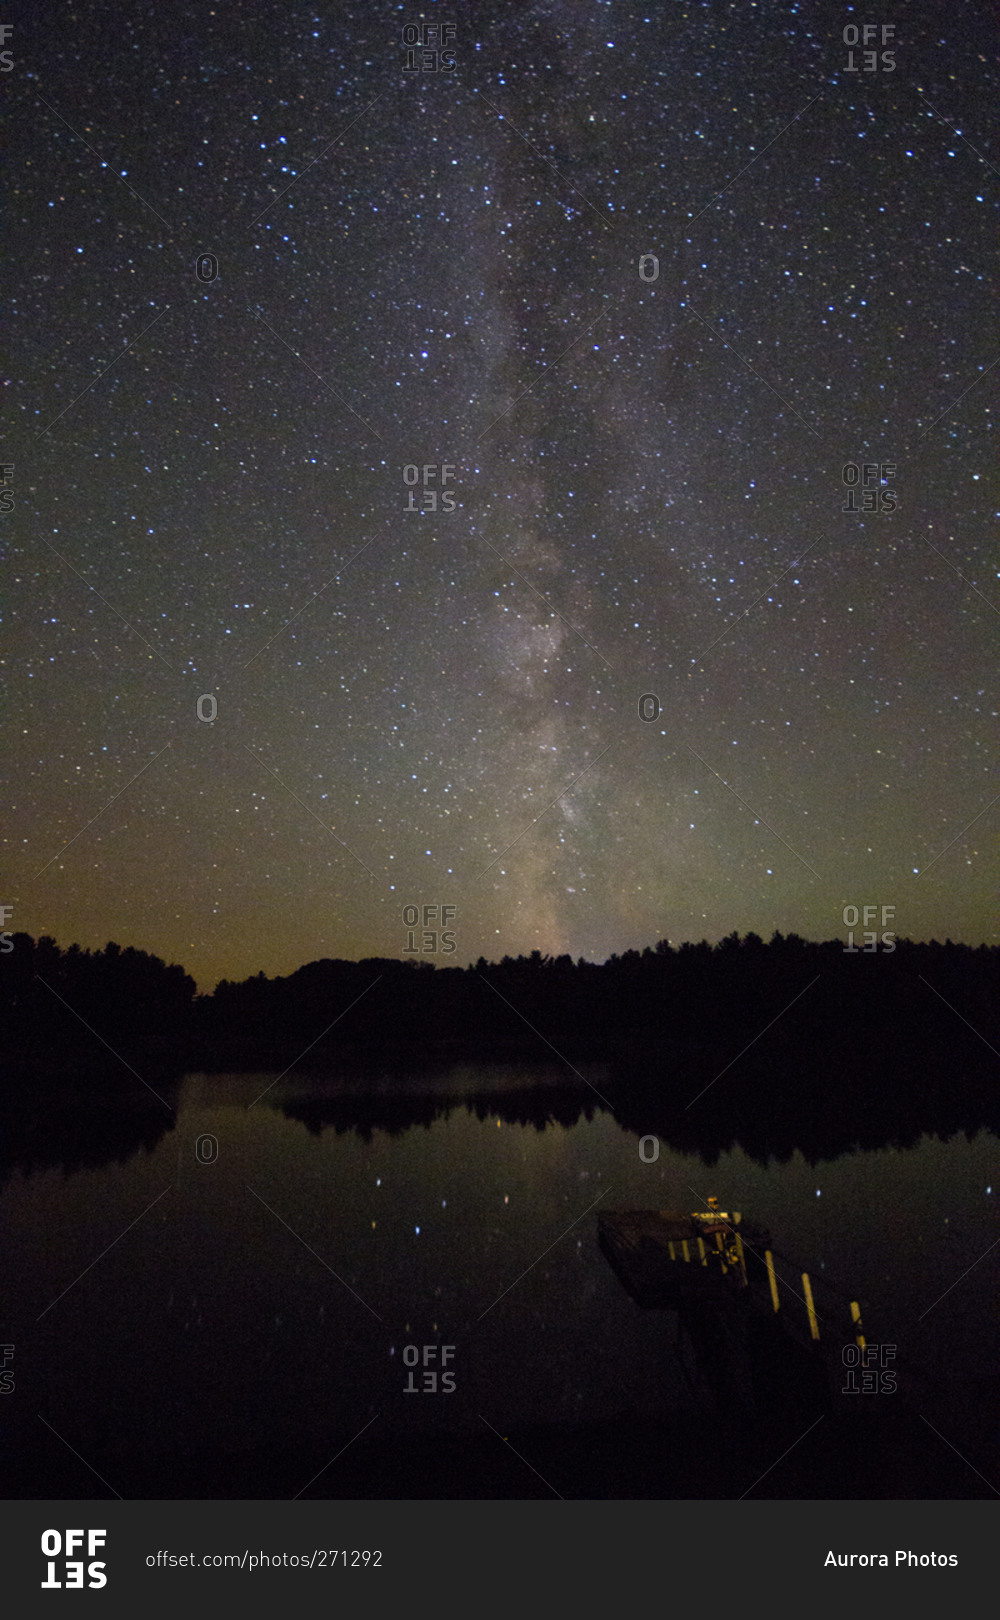 The Milky Way galaxy visible over the French River, Canada